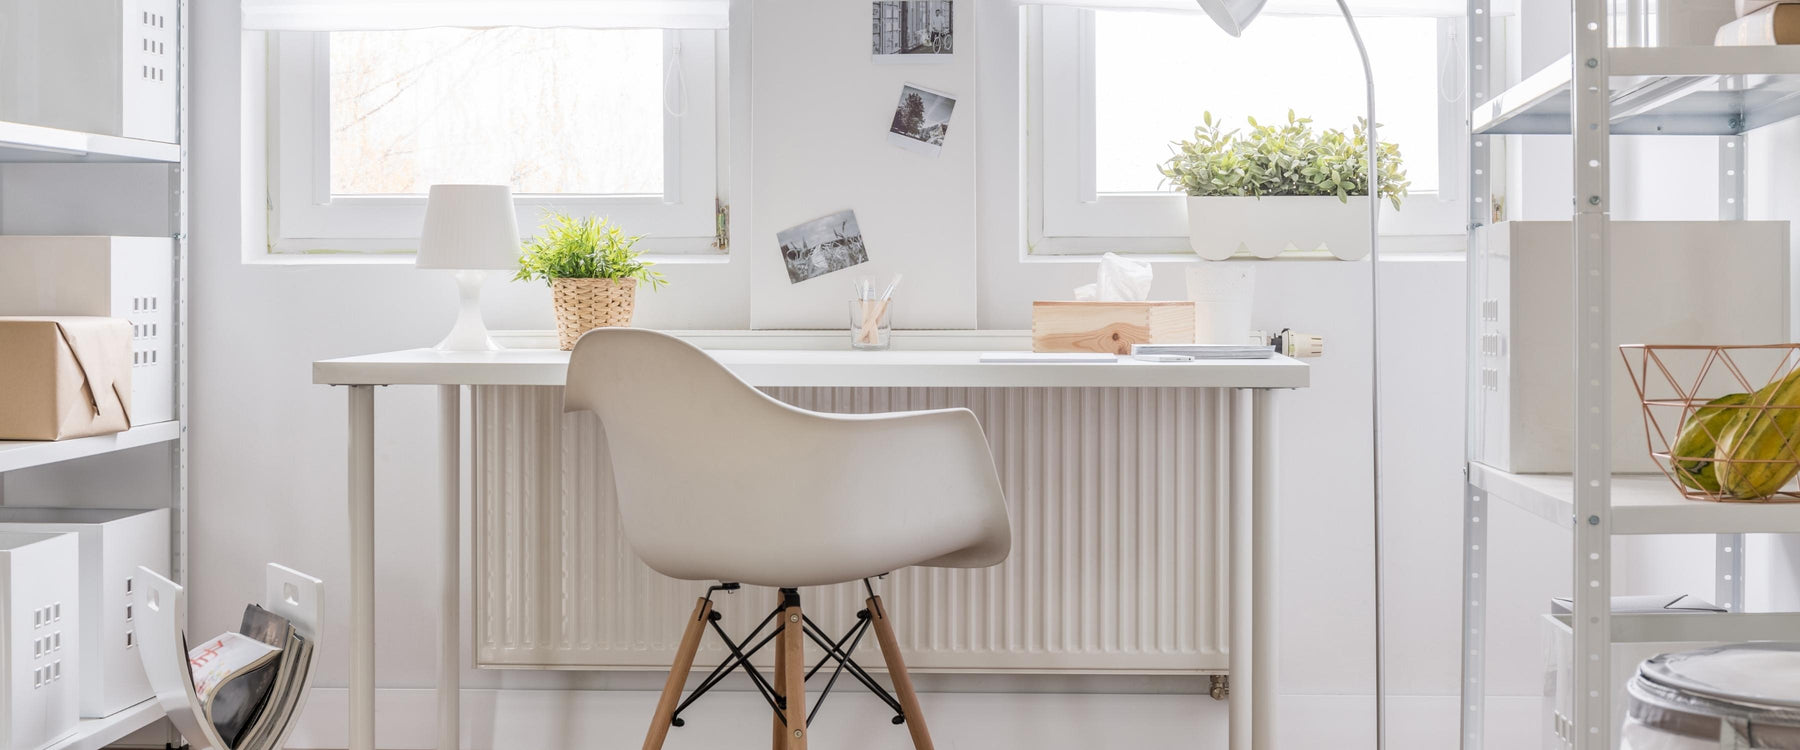 5 Tips for Creating an Efficient Workspace